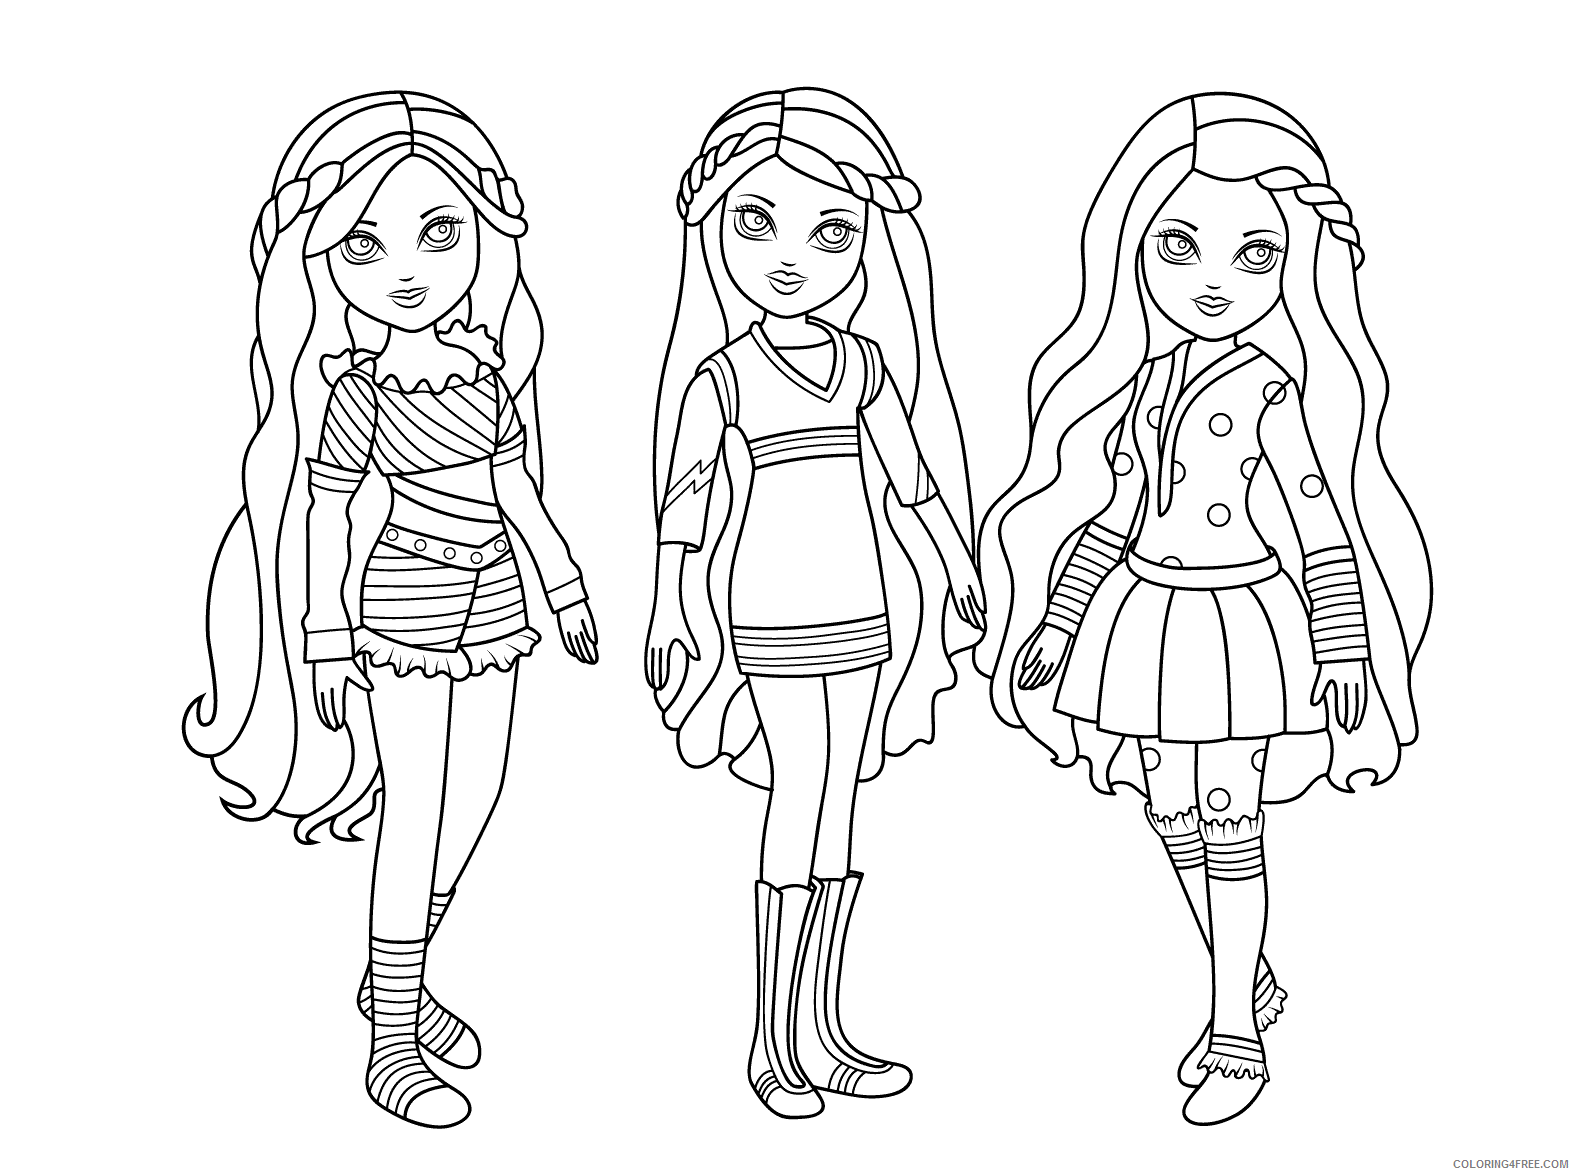 American Girl Doll Coloring Pages for Girls American Girl Doll Wellie Wishers Printable 2021 0019 Coloring4free